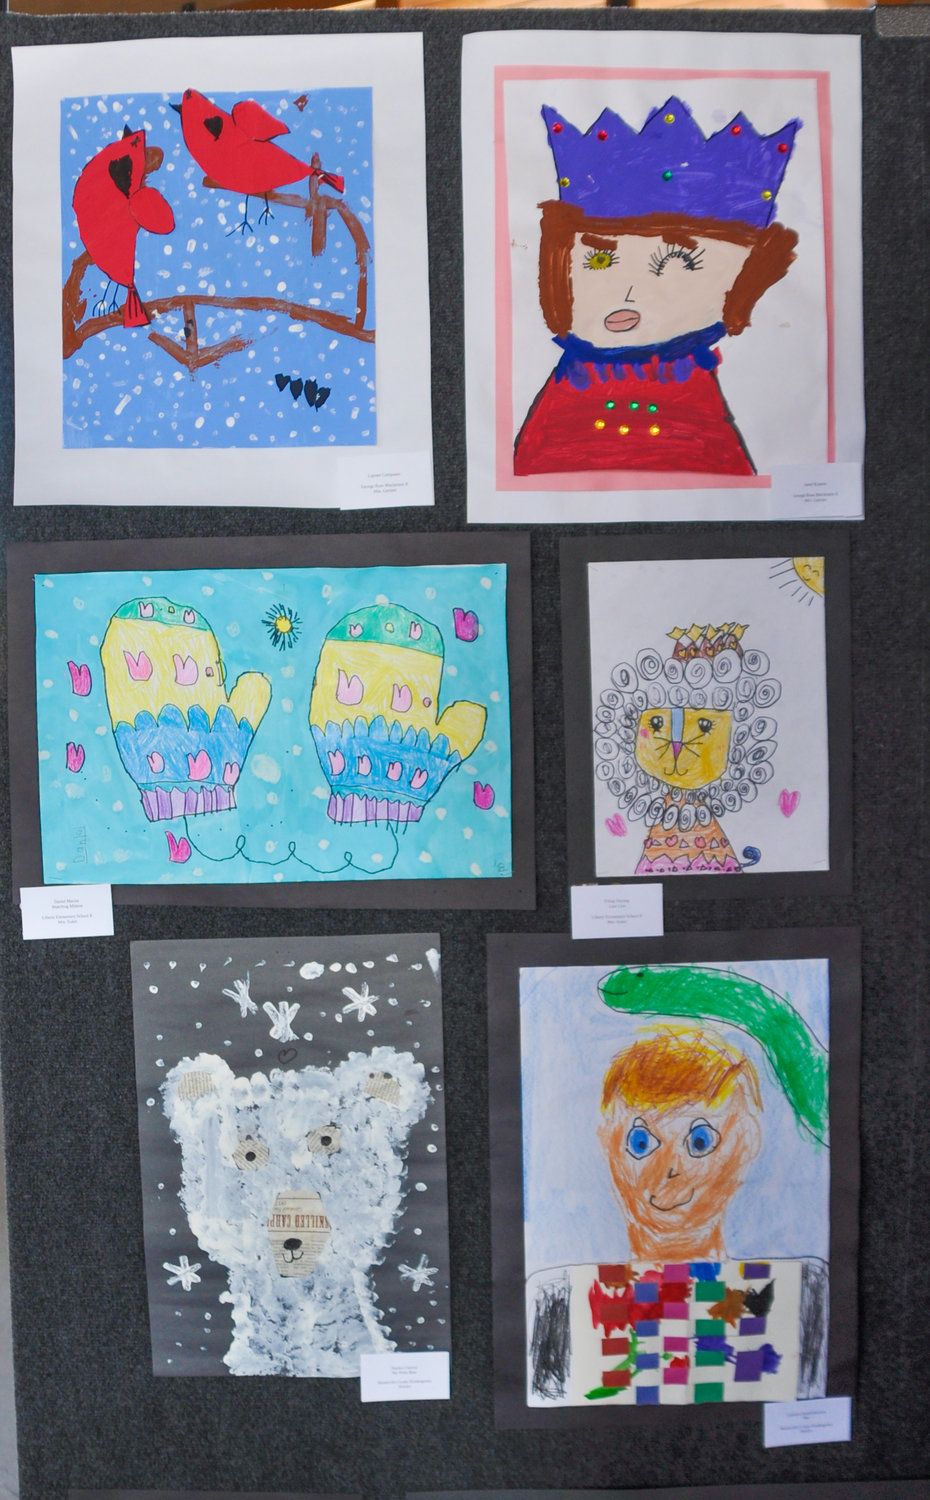 "I can’t even draw a stick figure, but some of those five year-olds are freakin’ geniuses," says Jonathan Charles Fox, who attended the student art show at Bethel Woods.